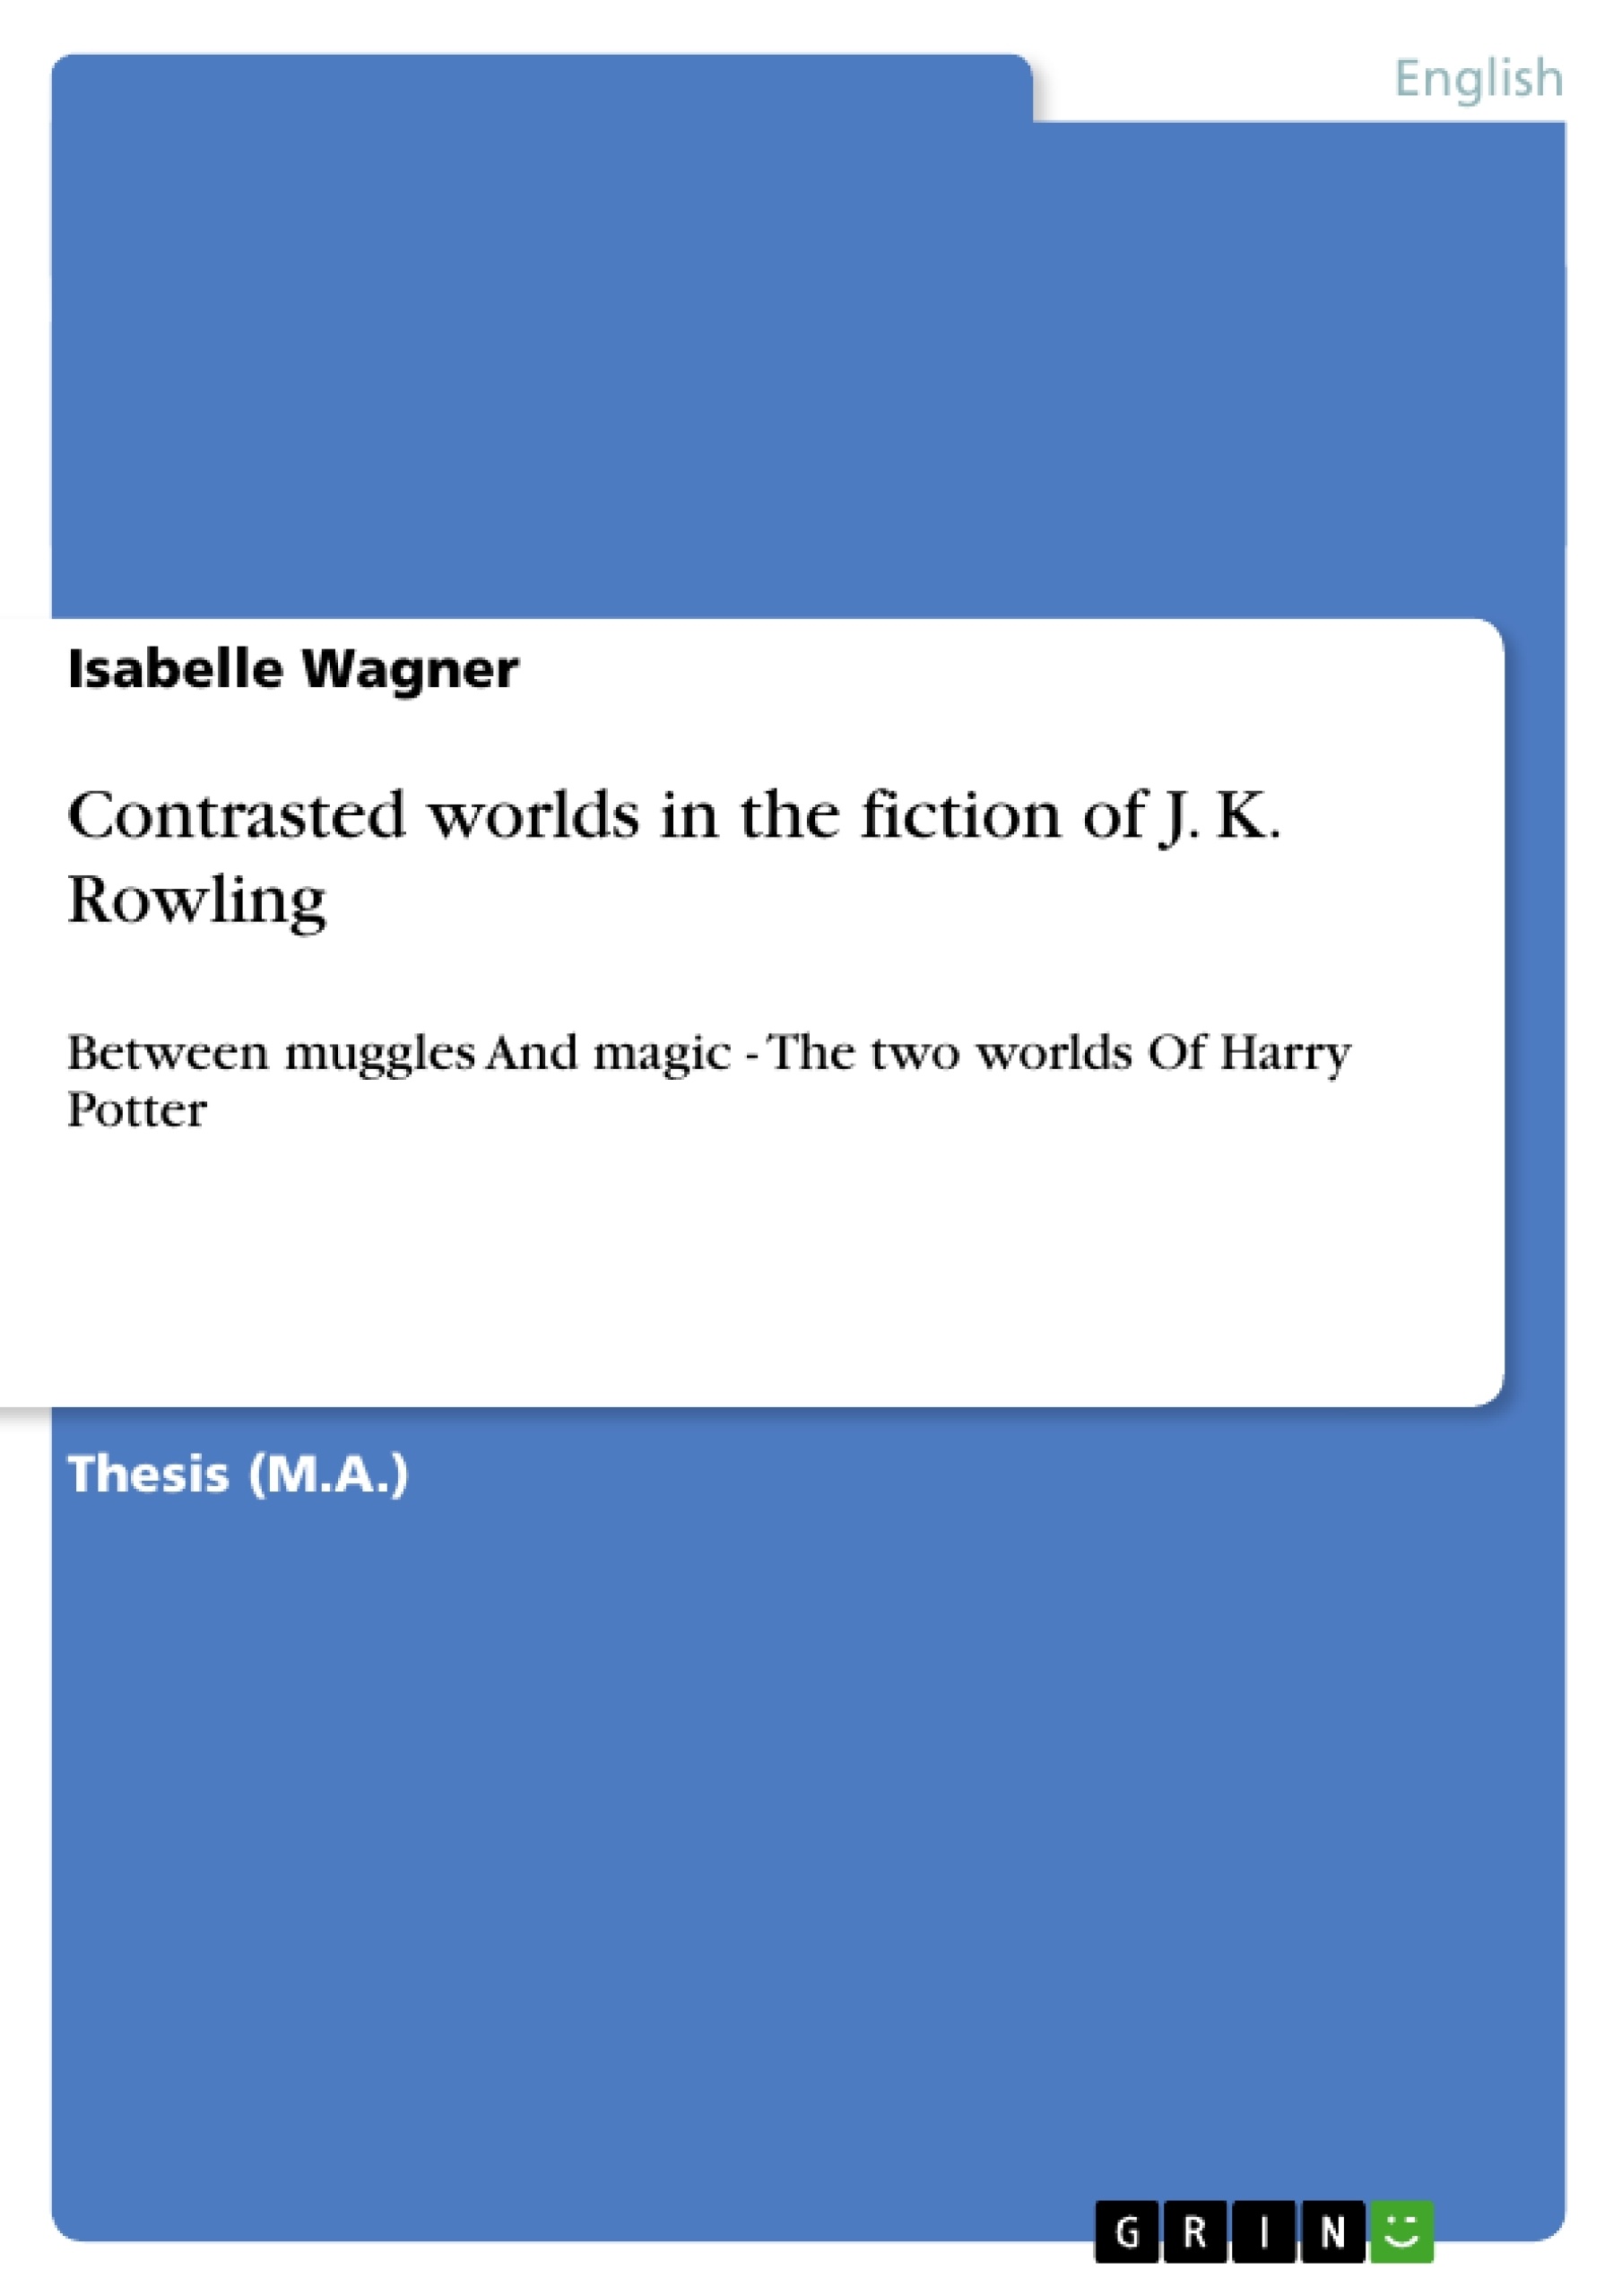 Title: Contrasted worlds in the fiction of J. K. Rowling